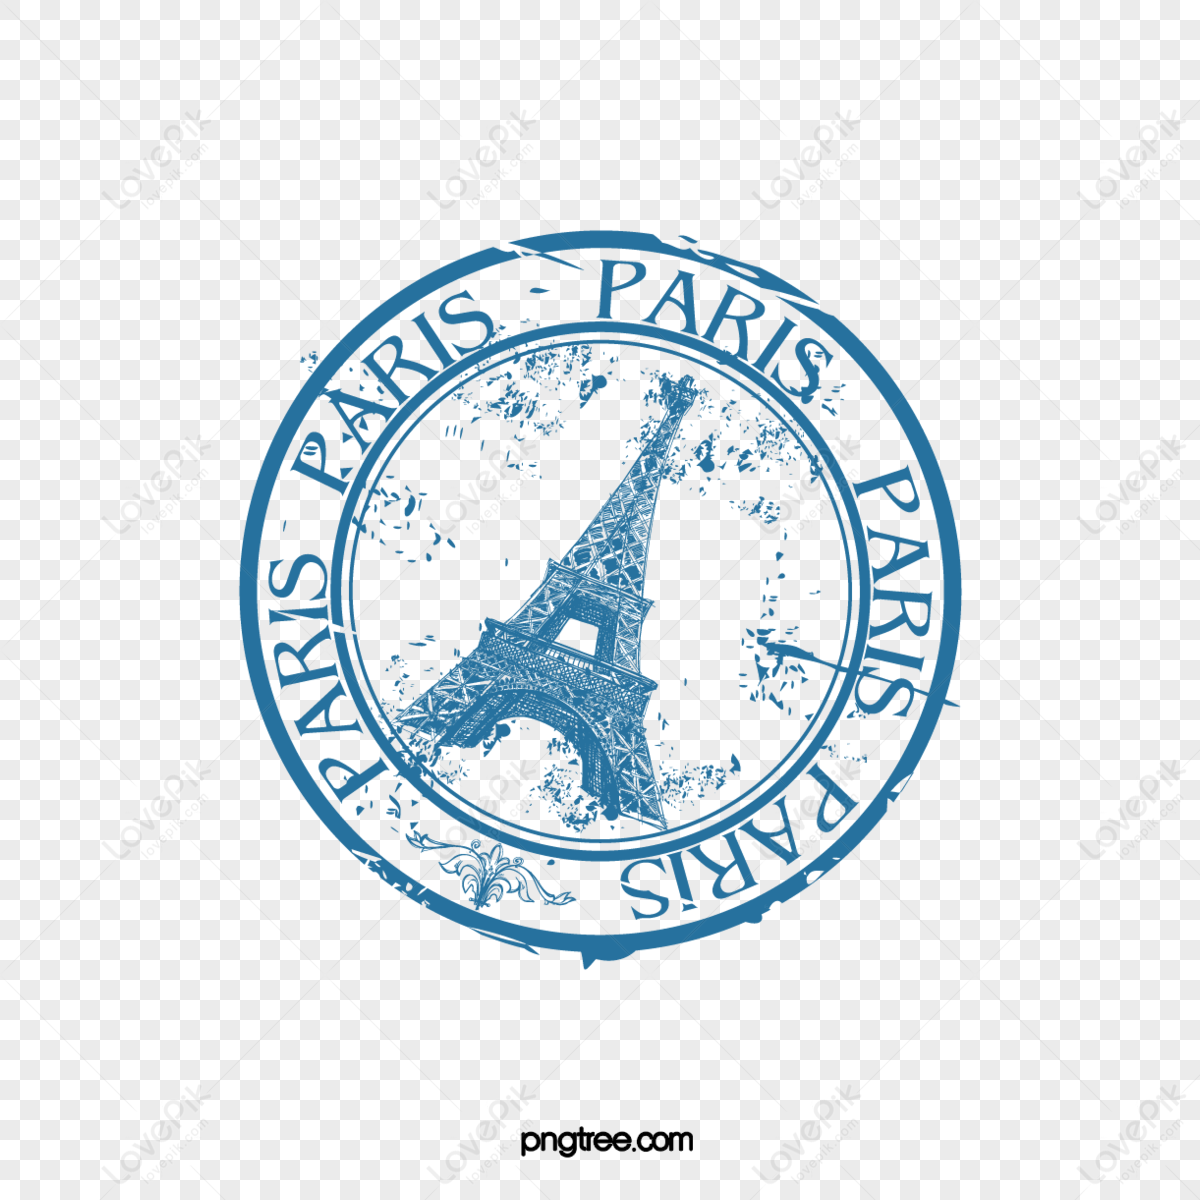 Eiffel Tower retro style postmark,chapter,vintage style,vintage seal png transparent background